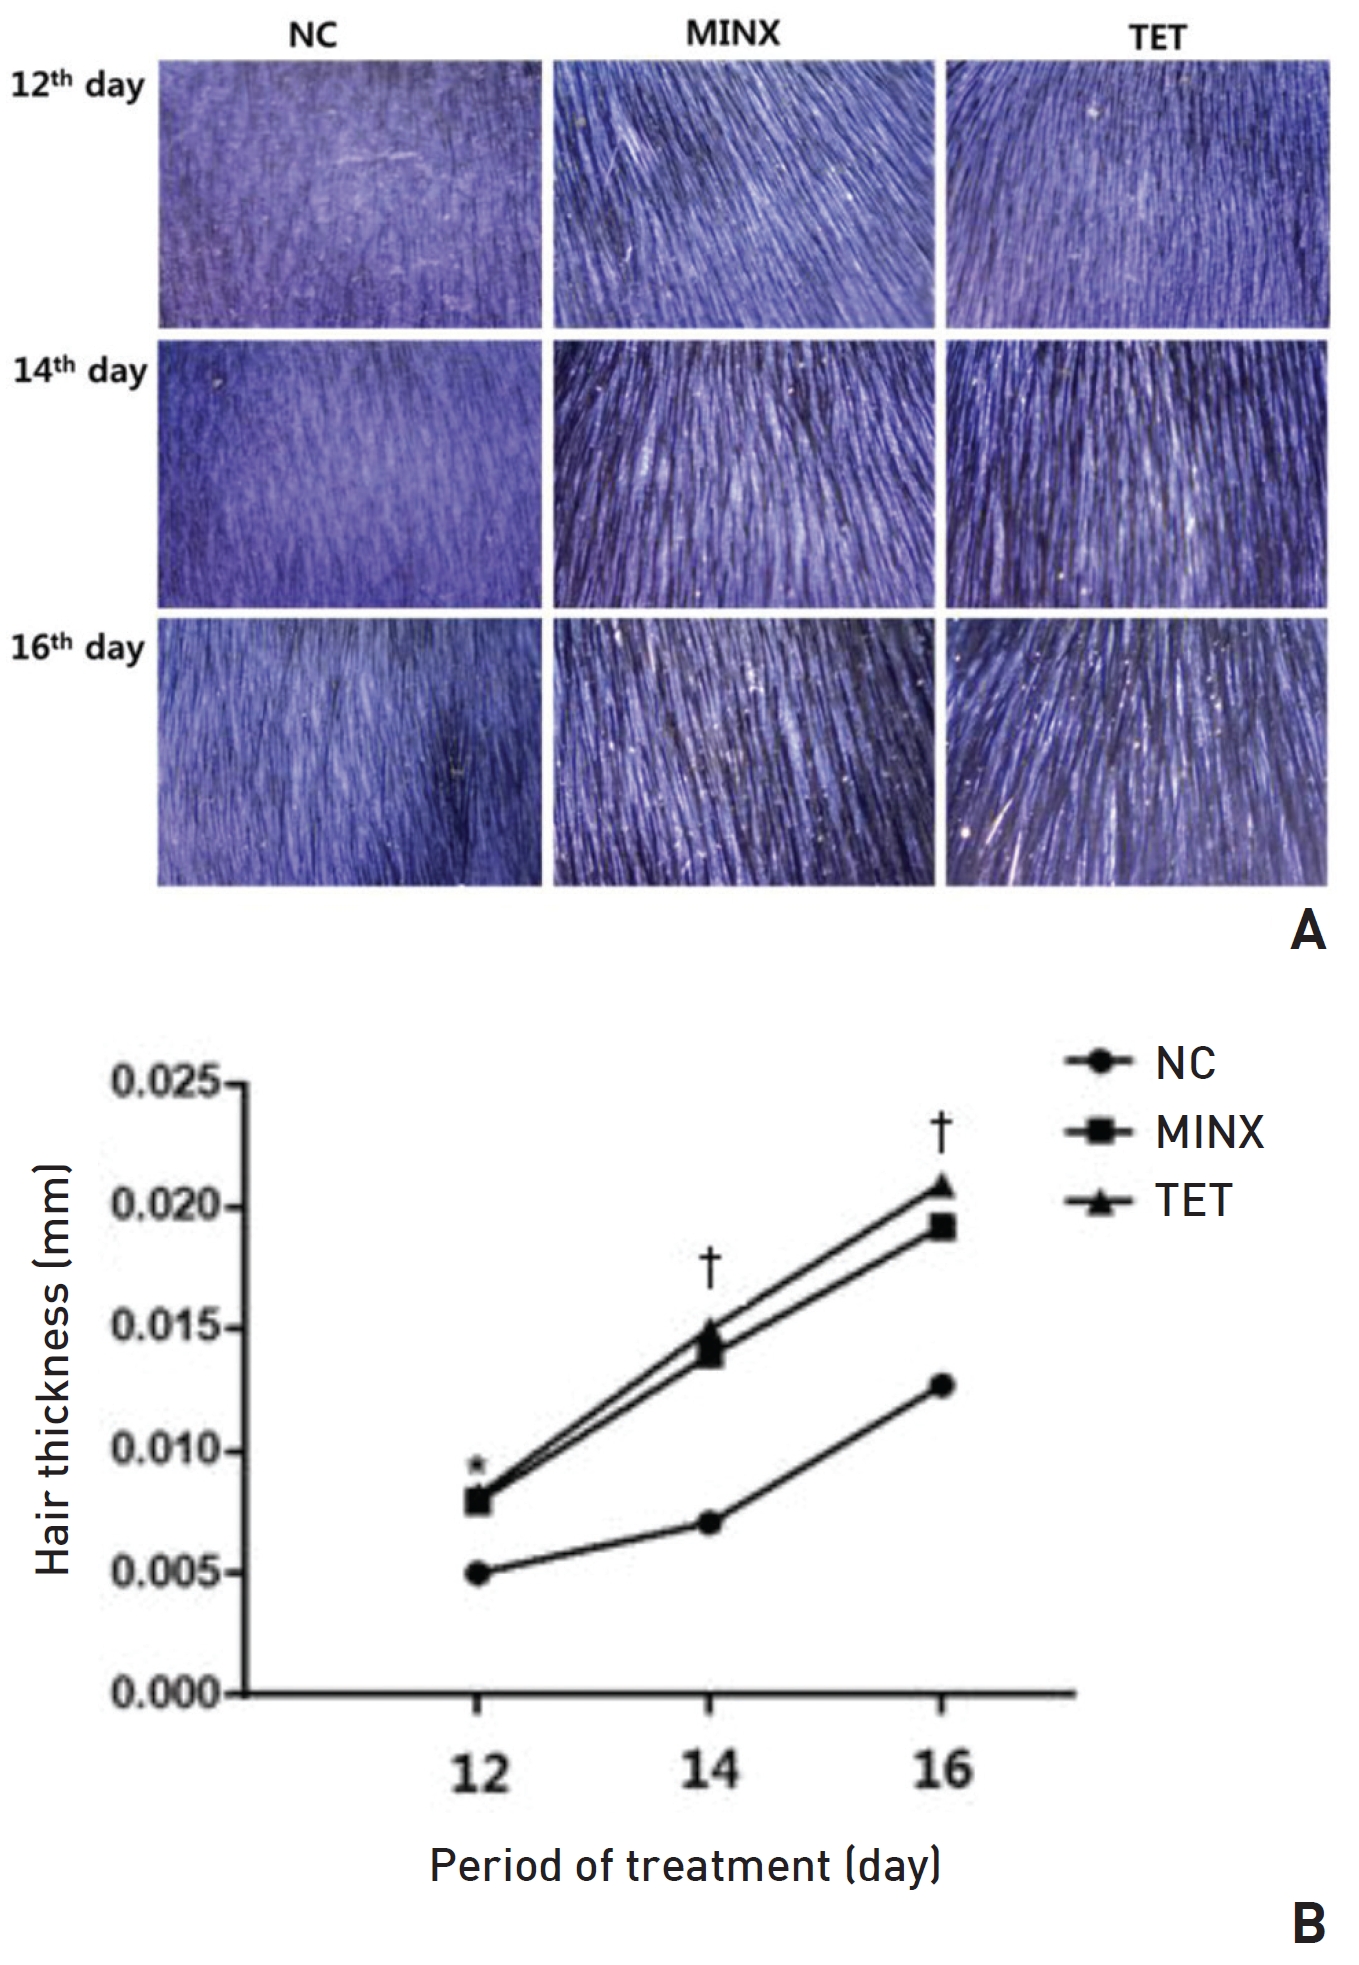 TET also increased the hair thickness of depilated skin lesions on C57BL/6 mice.